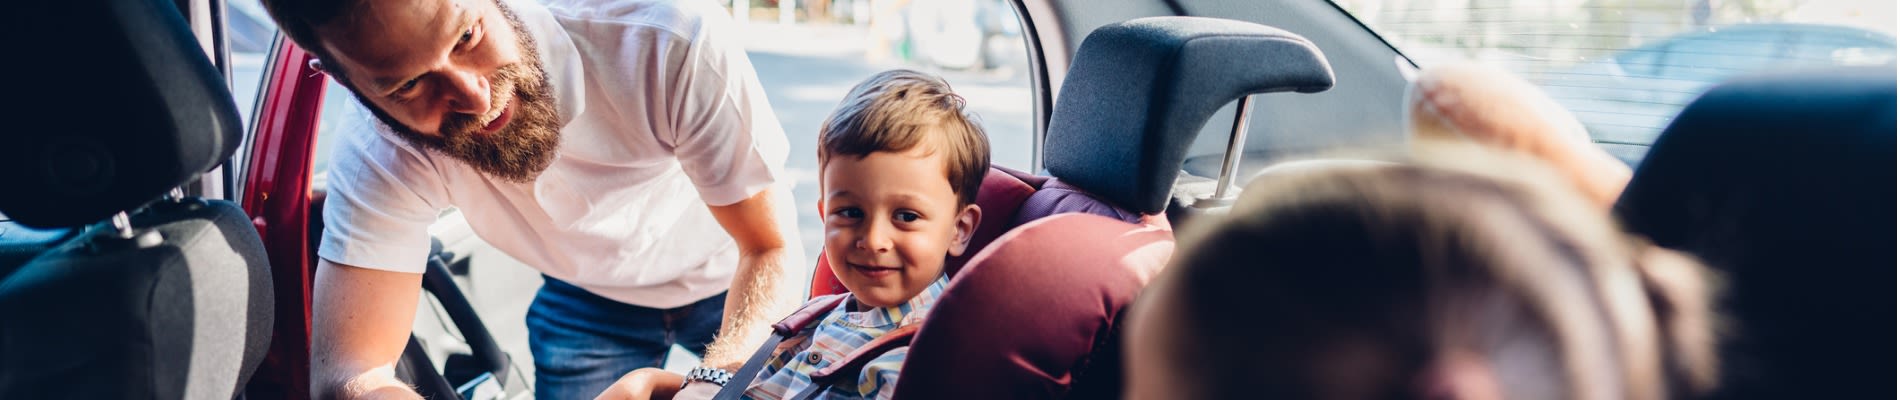 Shine Lawyers | Parent strapping children into car seats | Shine Lawyers